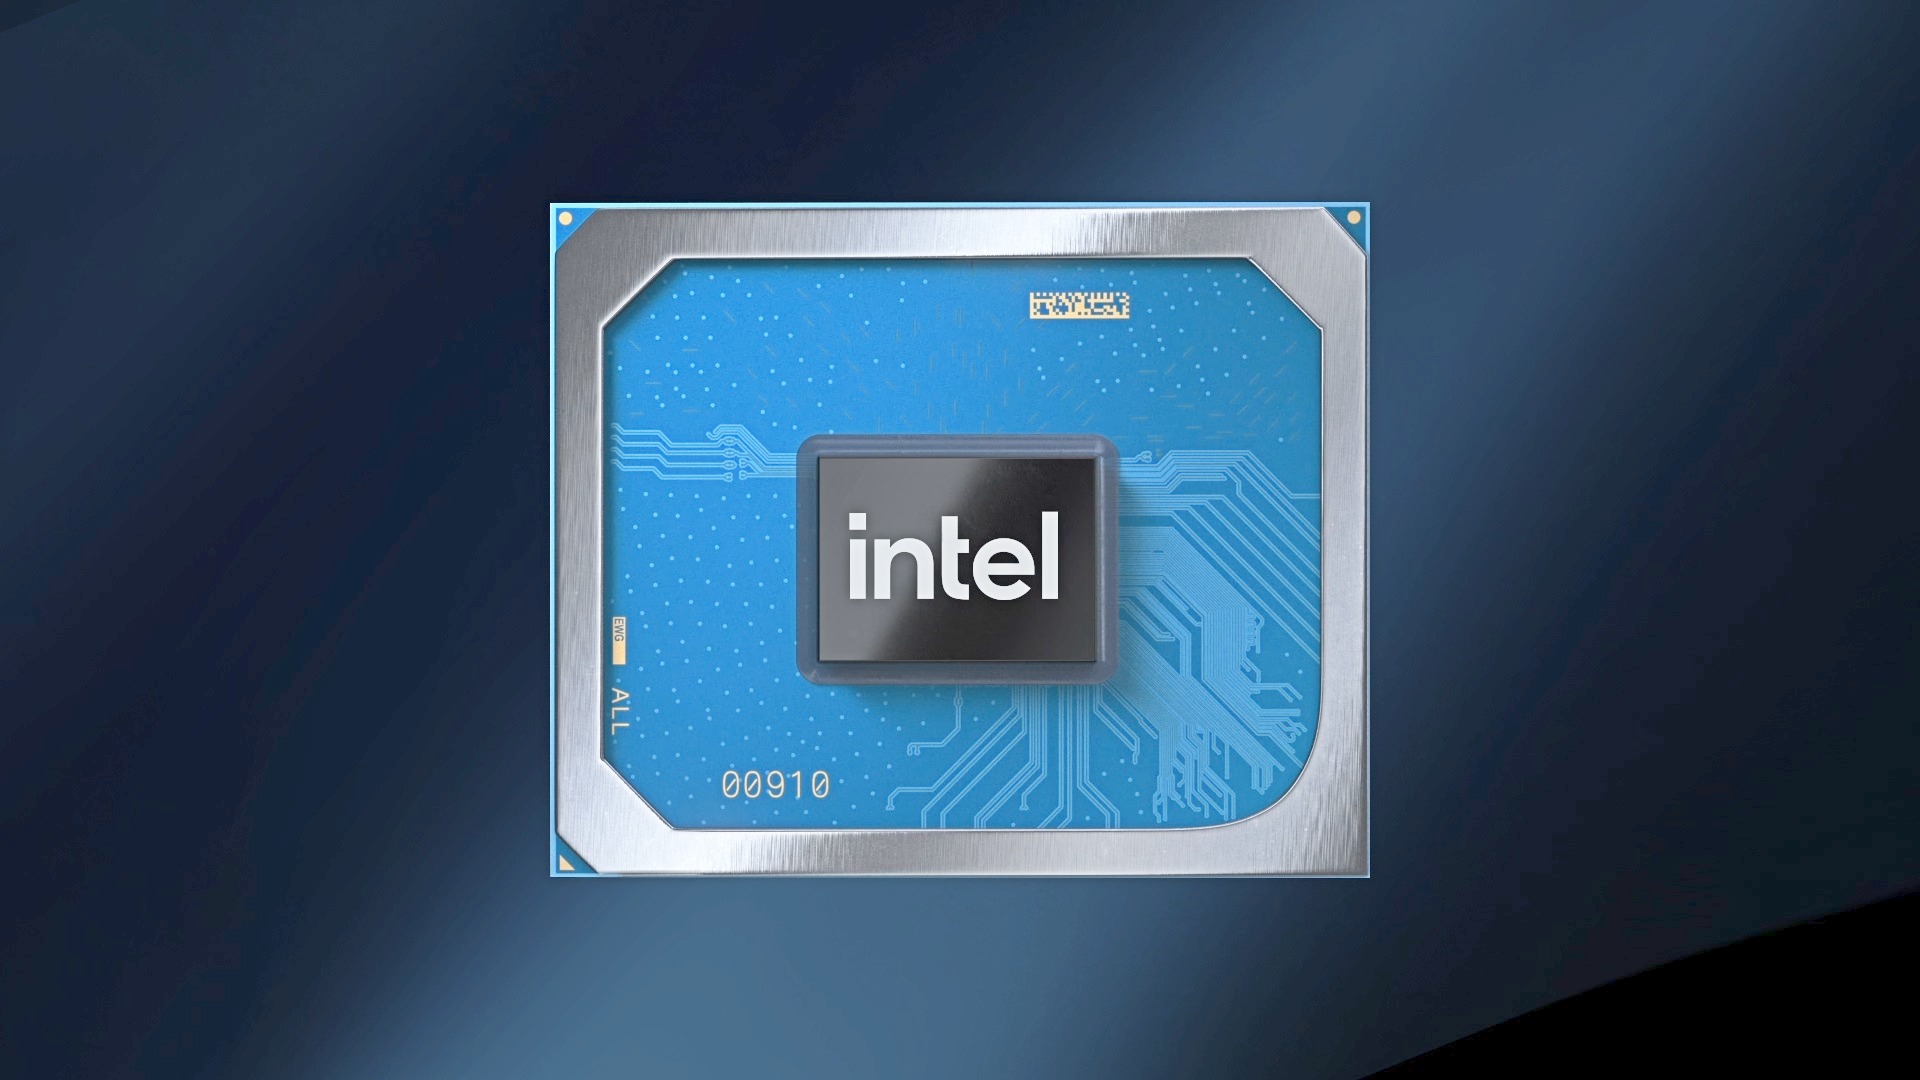 Intel’s Secret Key to Decrypt Microcode Patches is Exposed